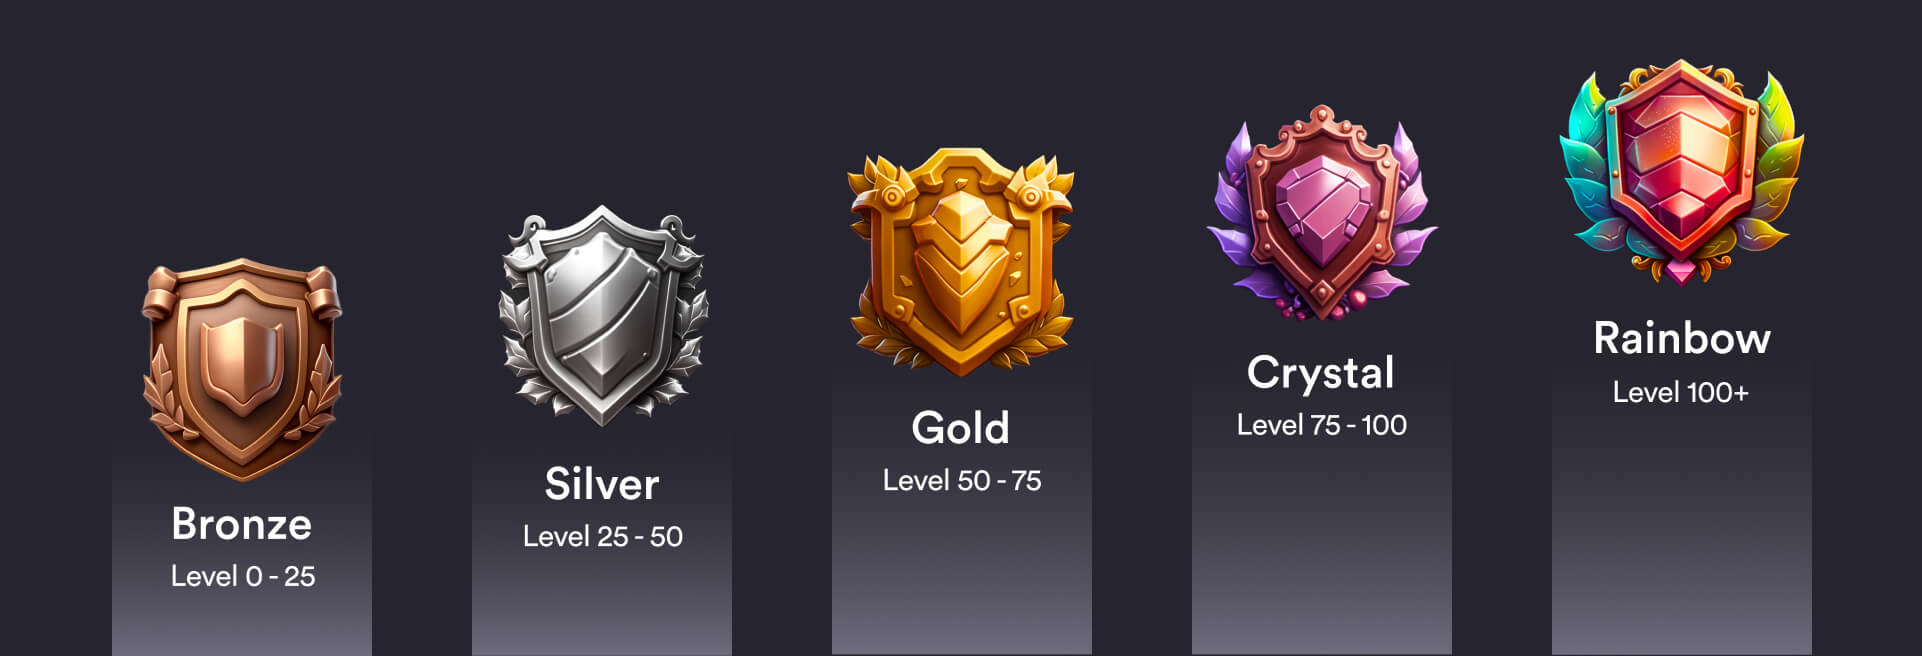 Rank of the five different creator levels which are bronze, silver, gold, crystal, and rainbow